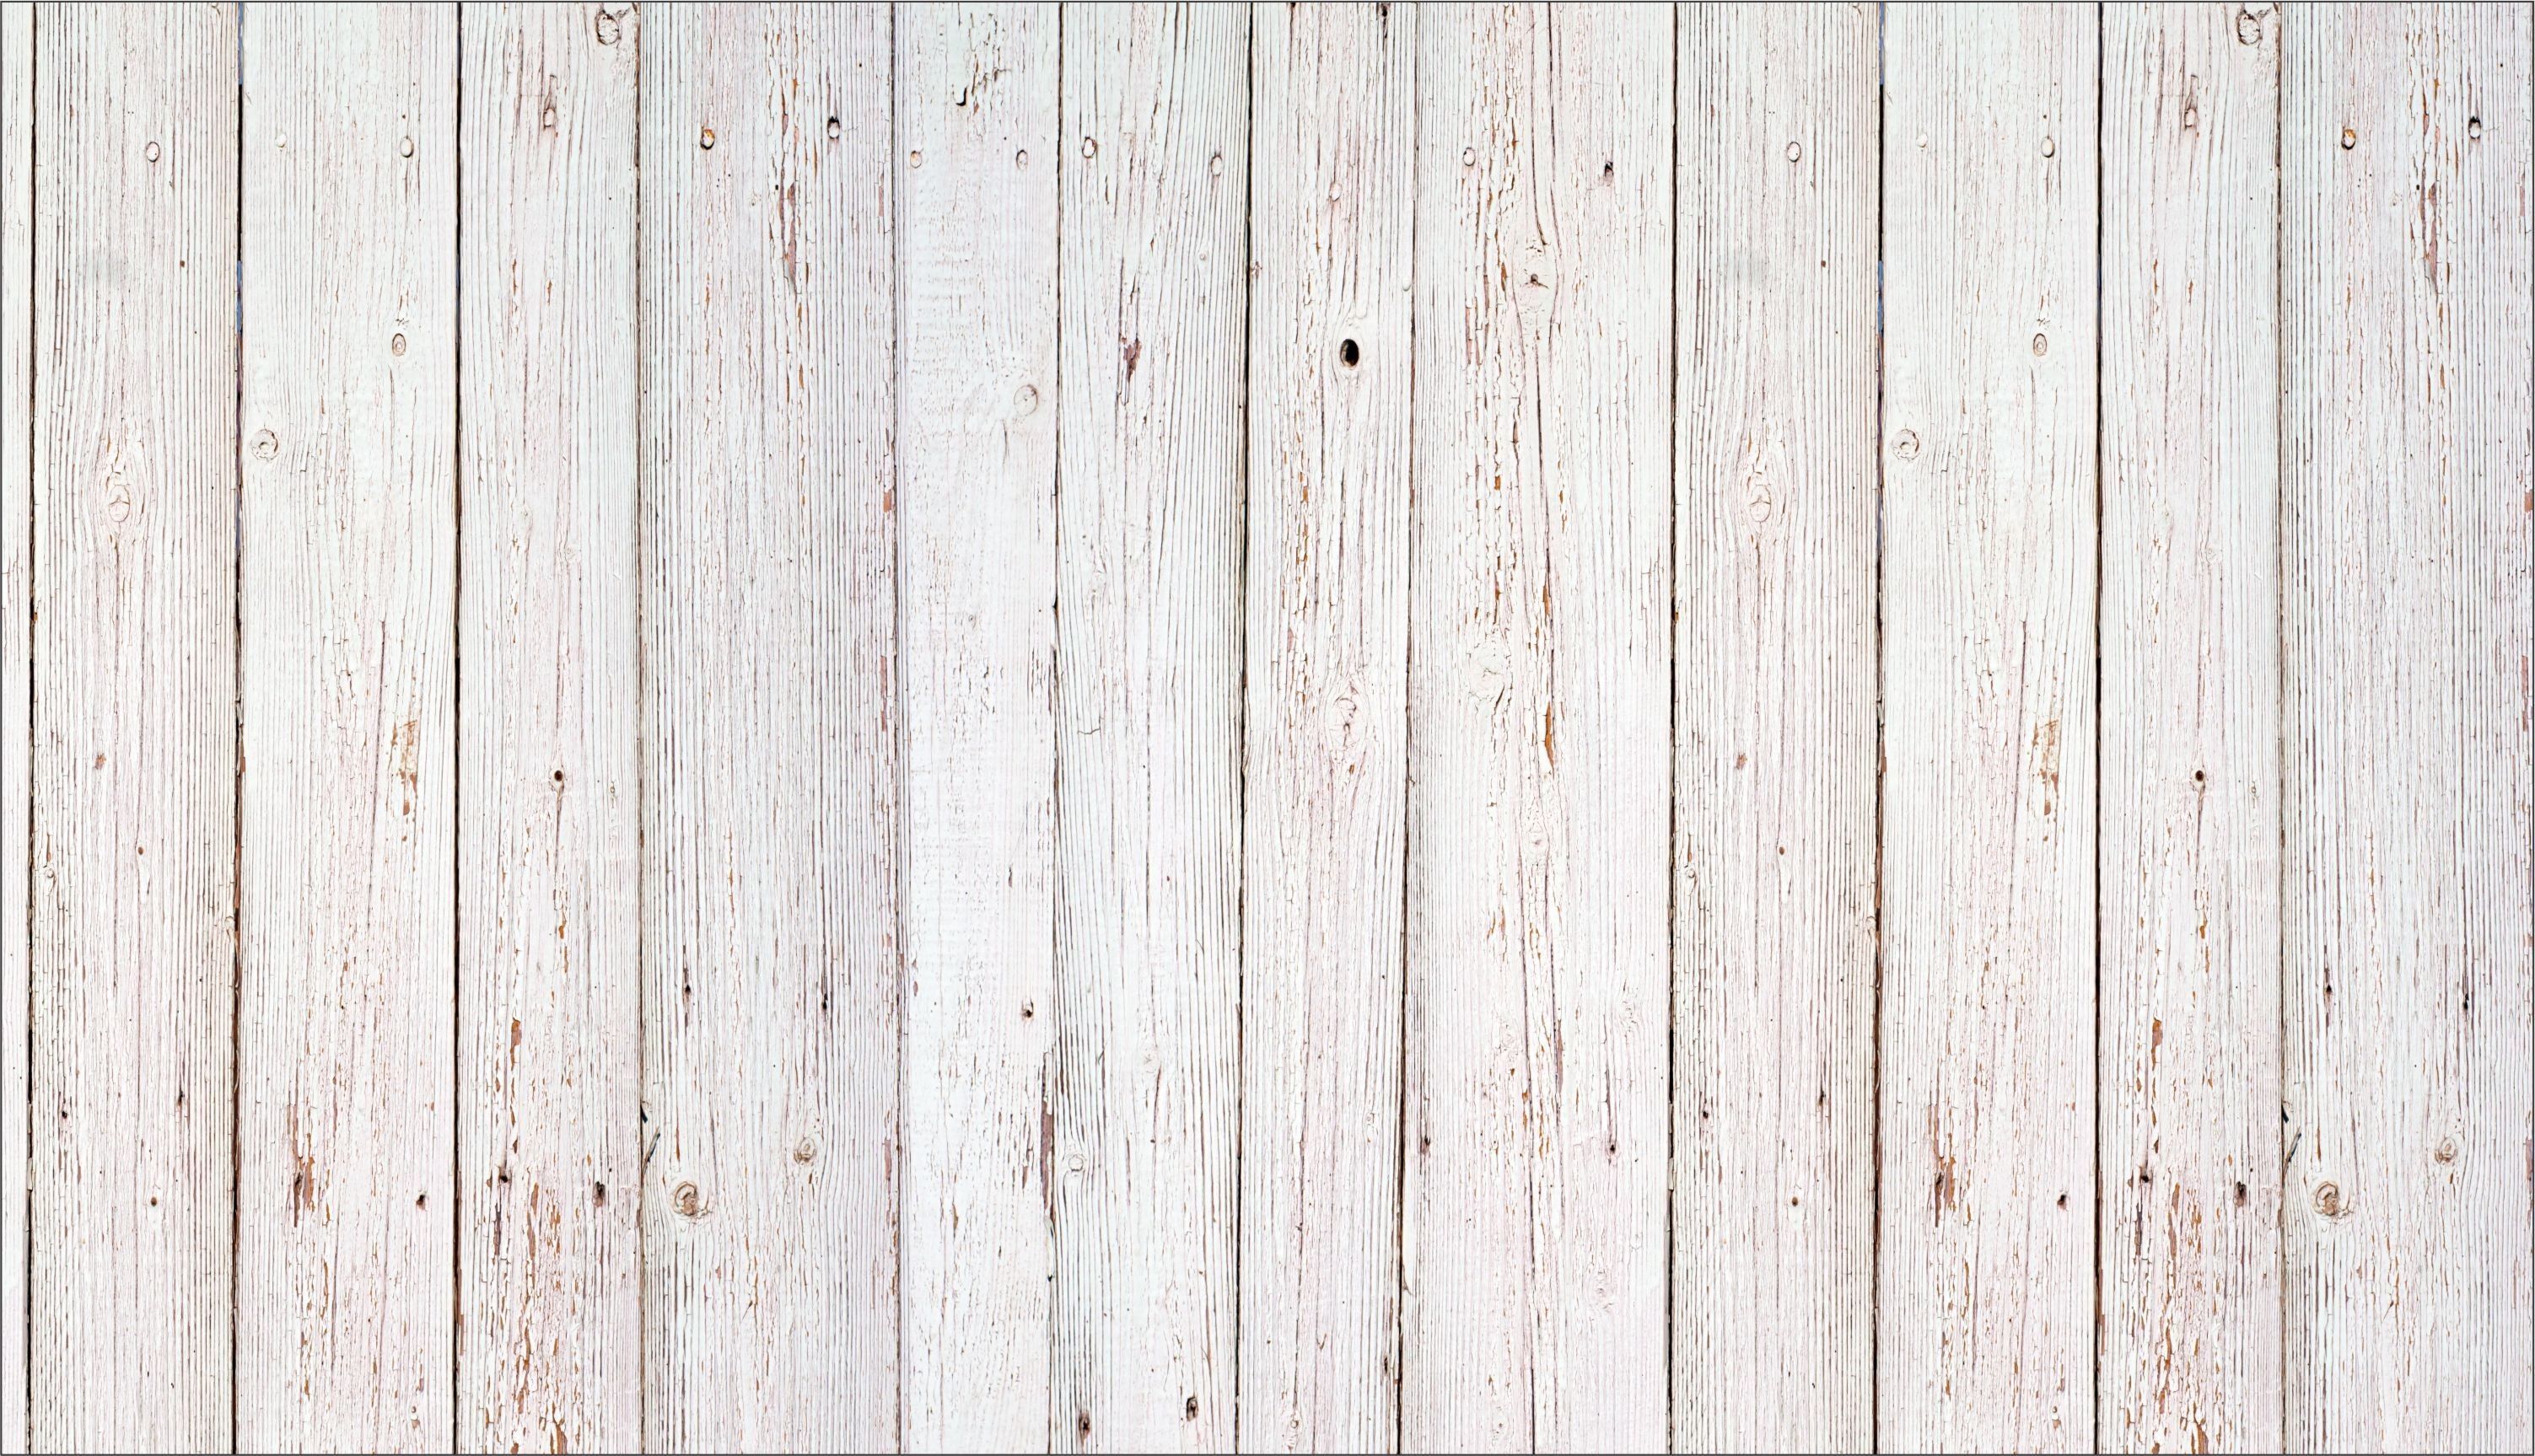 Res: 3006x White Wood HD Wallpaper Desktop Background #rpt px 1.07 MB AbstractRustic Wood. Repe. Wood wallpaper, White wood texture, Rustic wood background